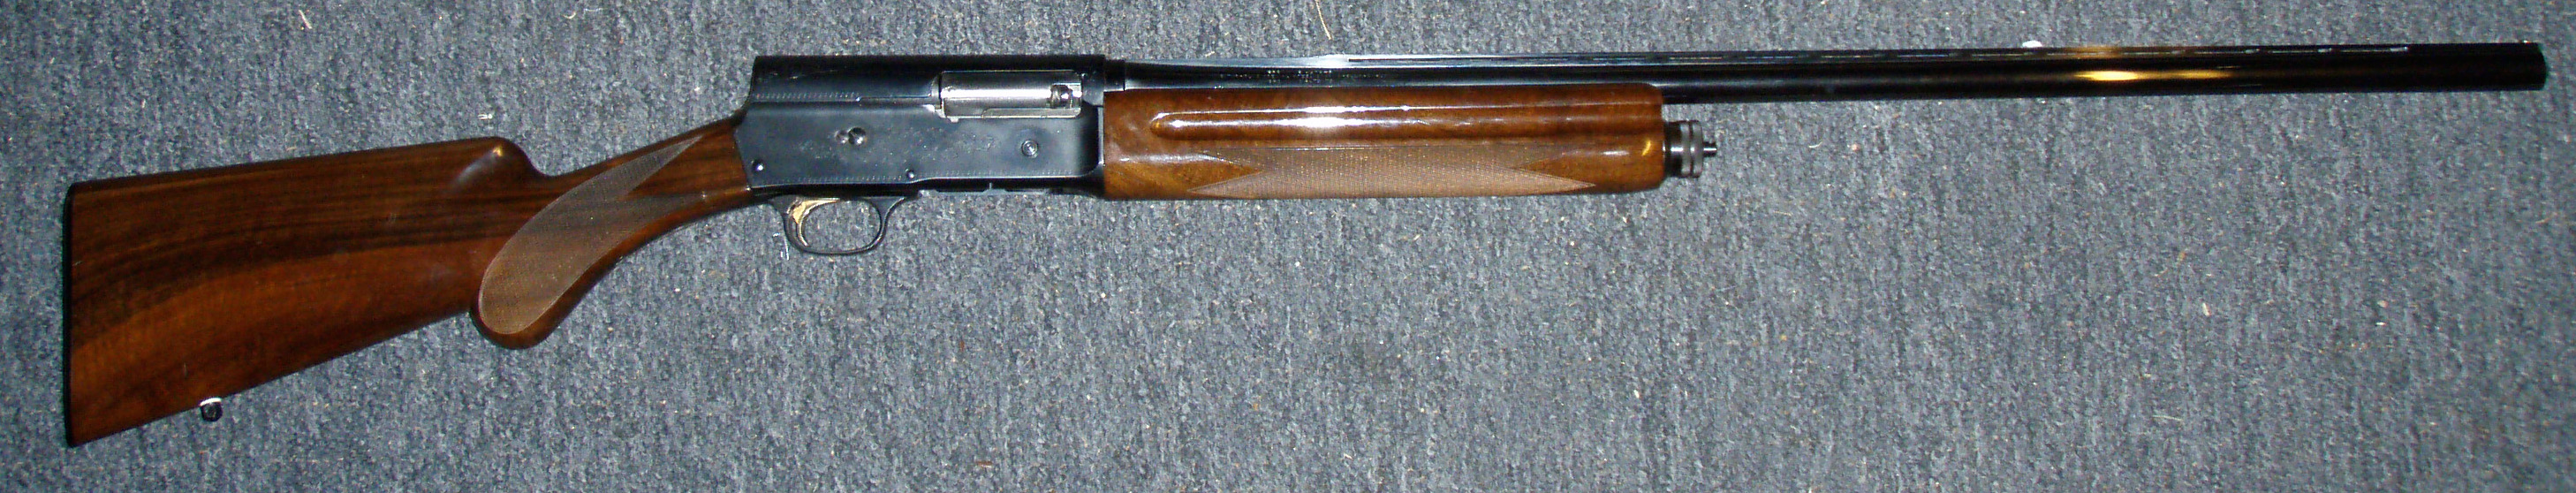 Related Wallpaper Deactivated Browning Auto Shotgun